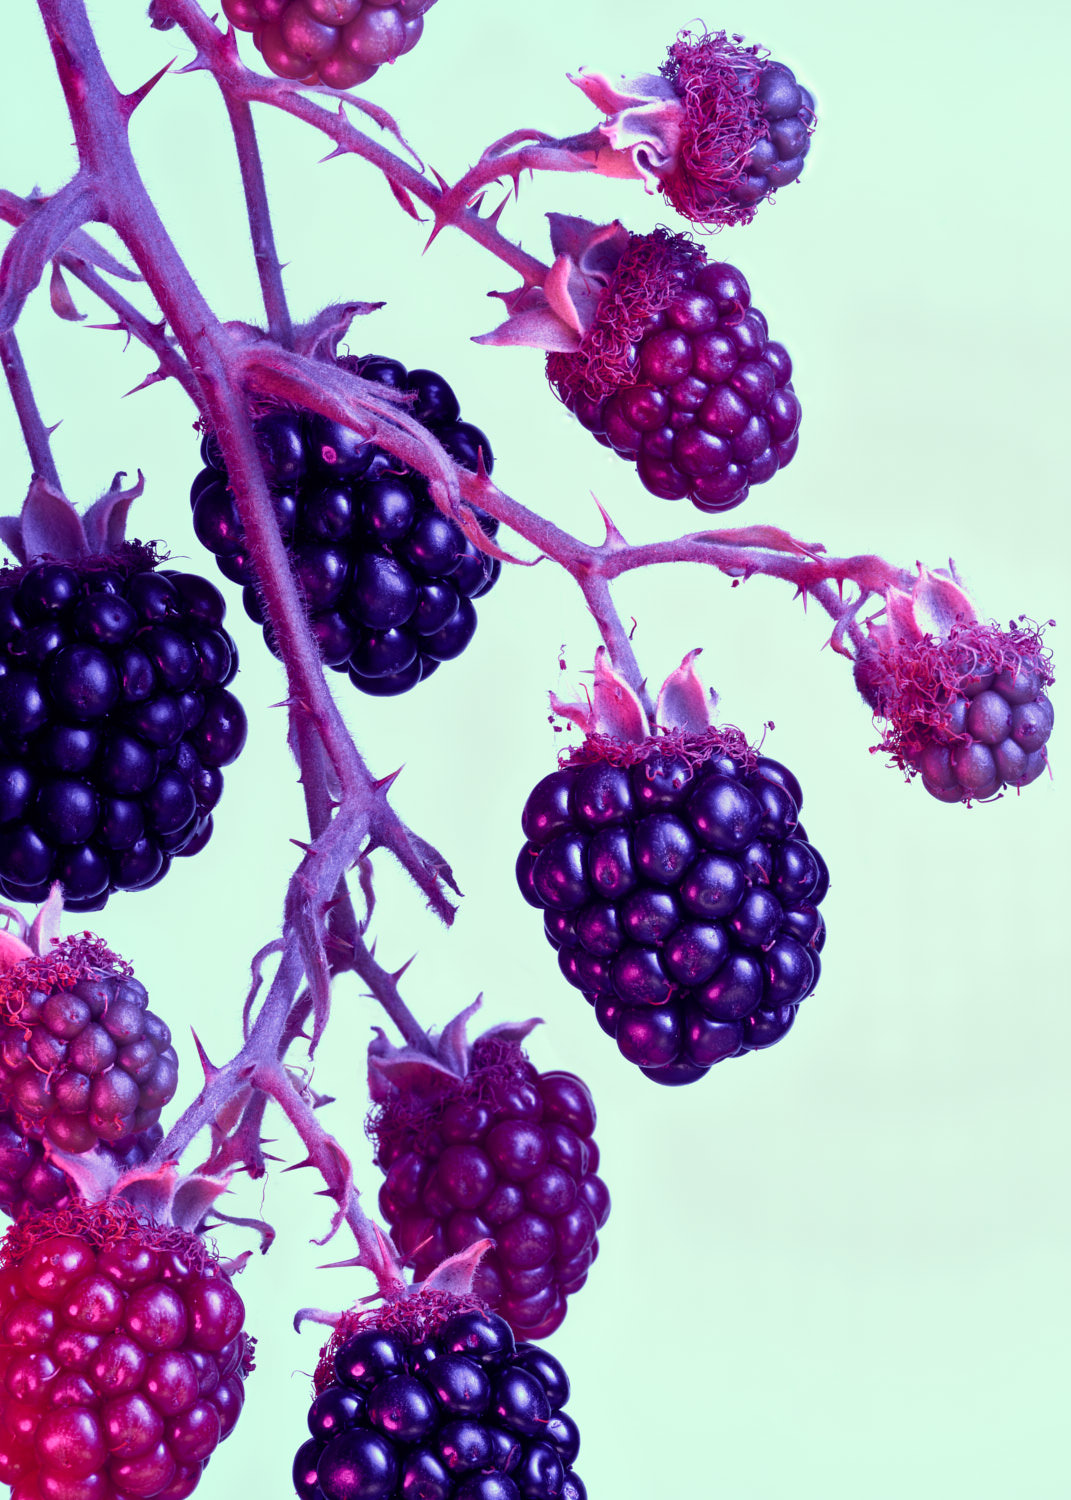 Blackberry berries hanging from a single bramble or branch   - Ryan Ball Food Photographer London